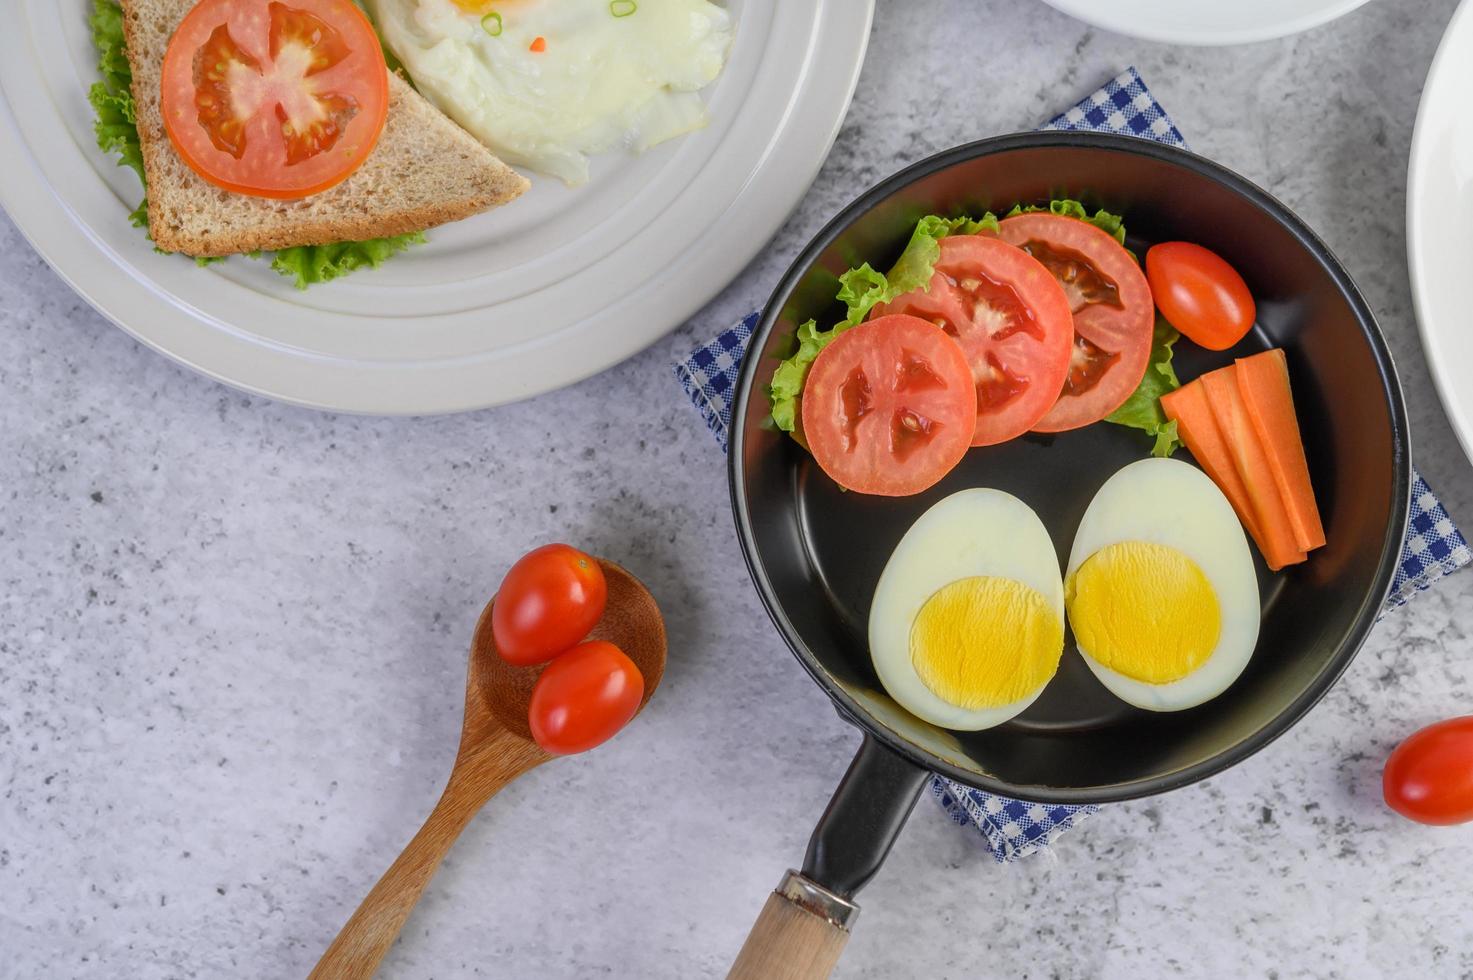 Boiled eggs, carrots, and tomatoes in a pan with tomatoes photo